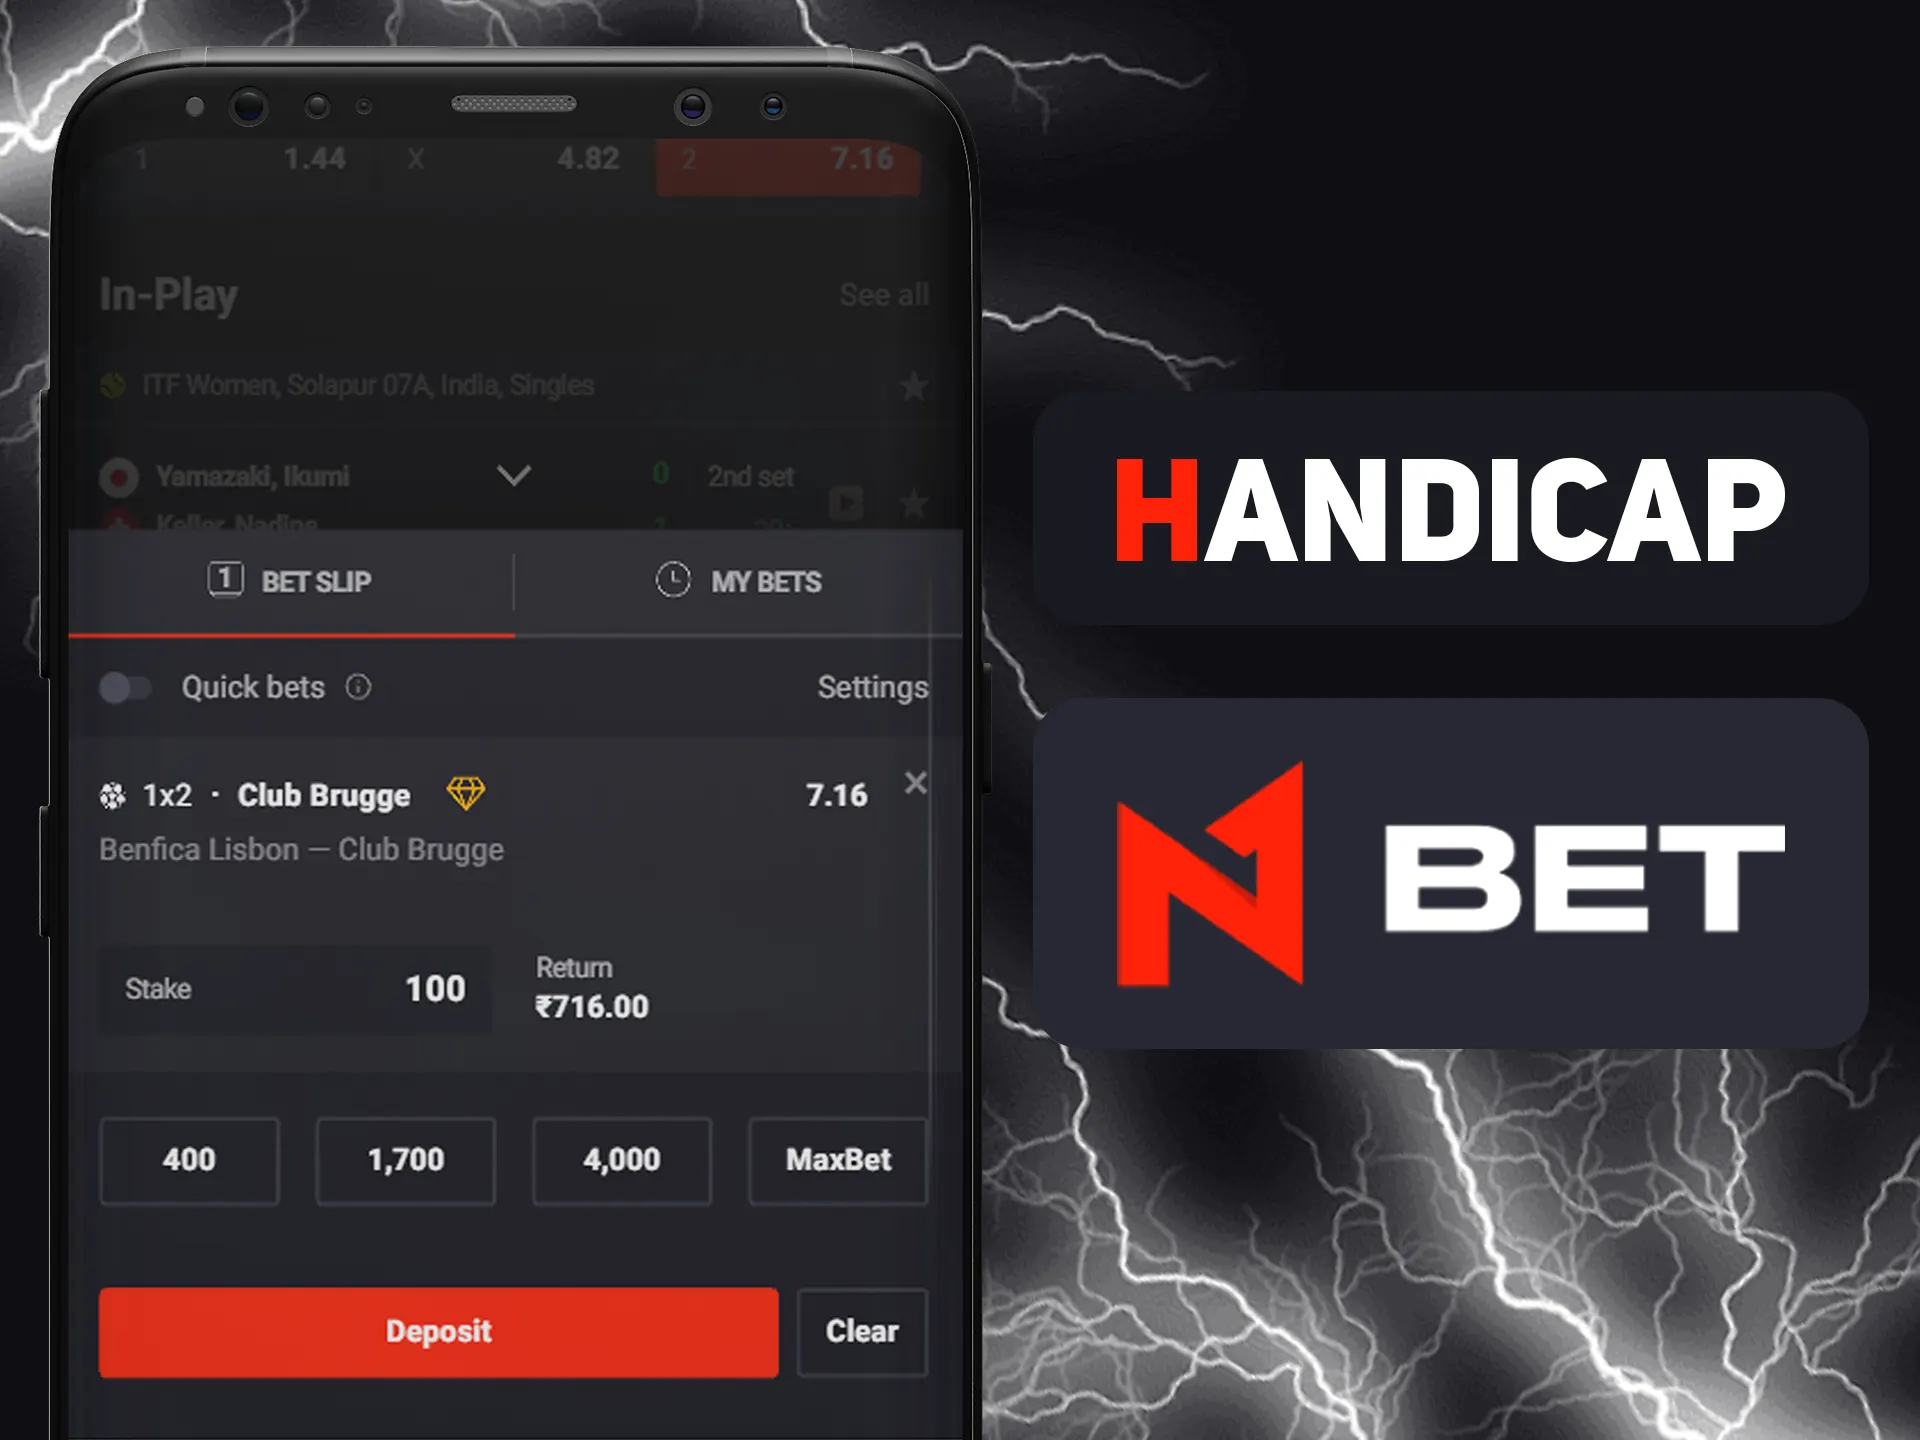 Bet on losing team and win money at N1bet.